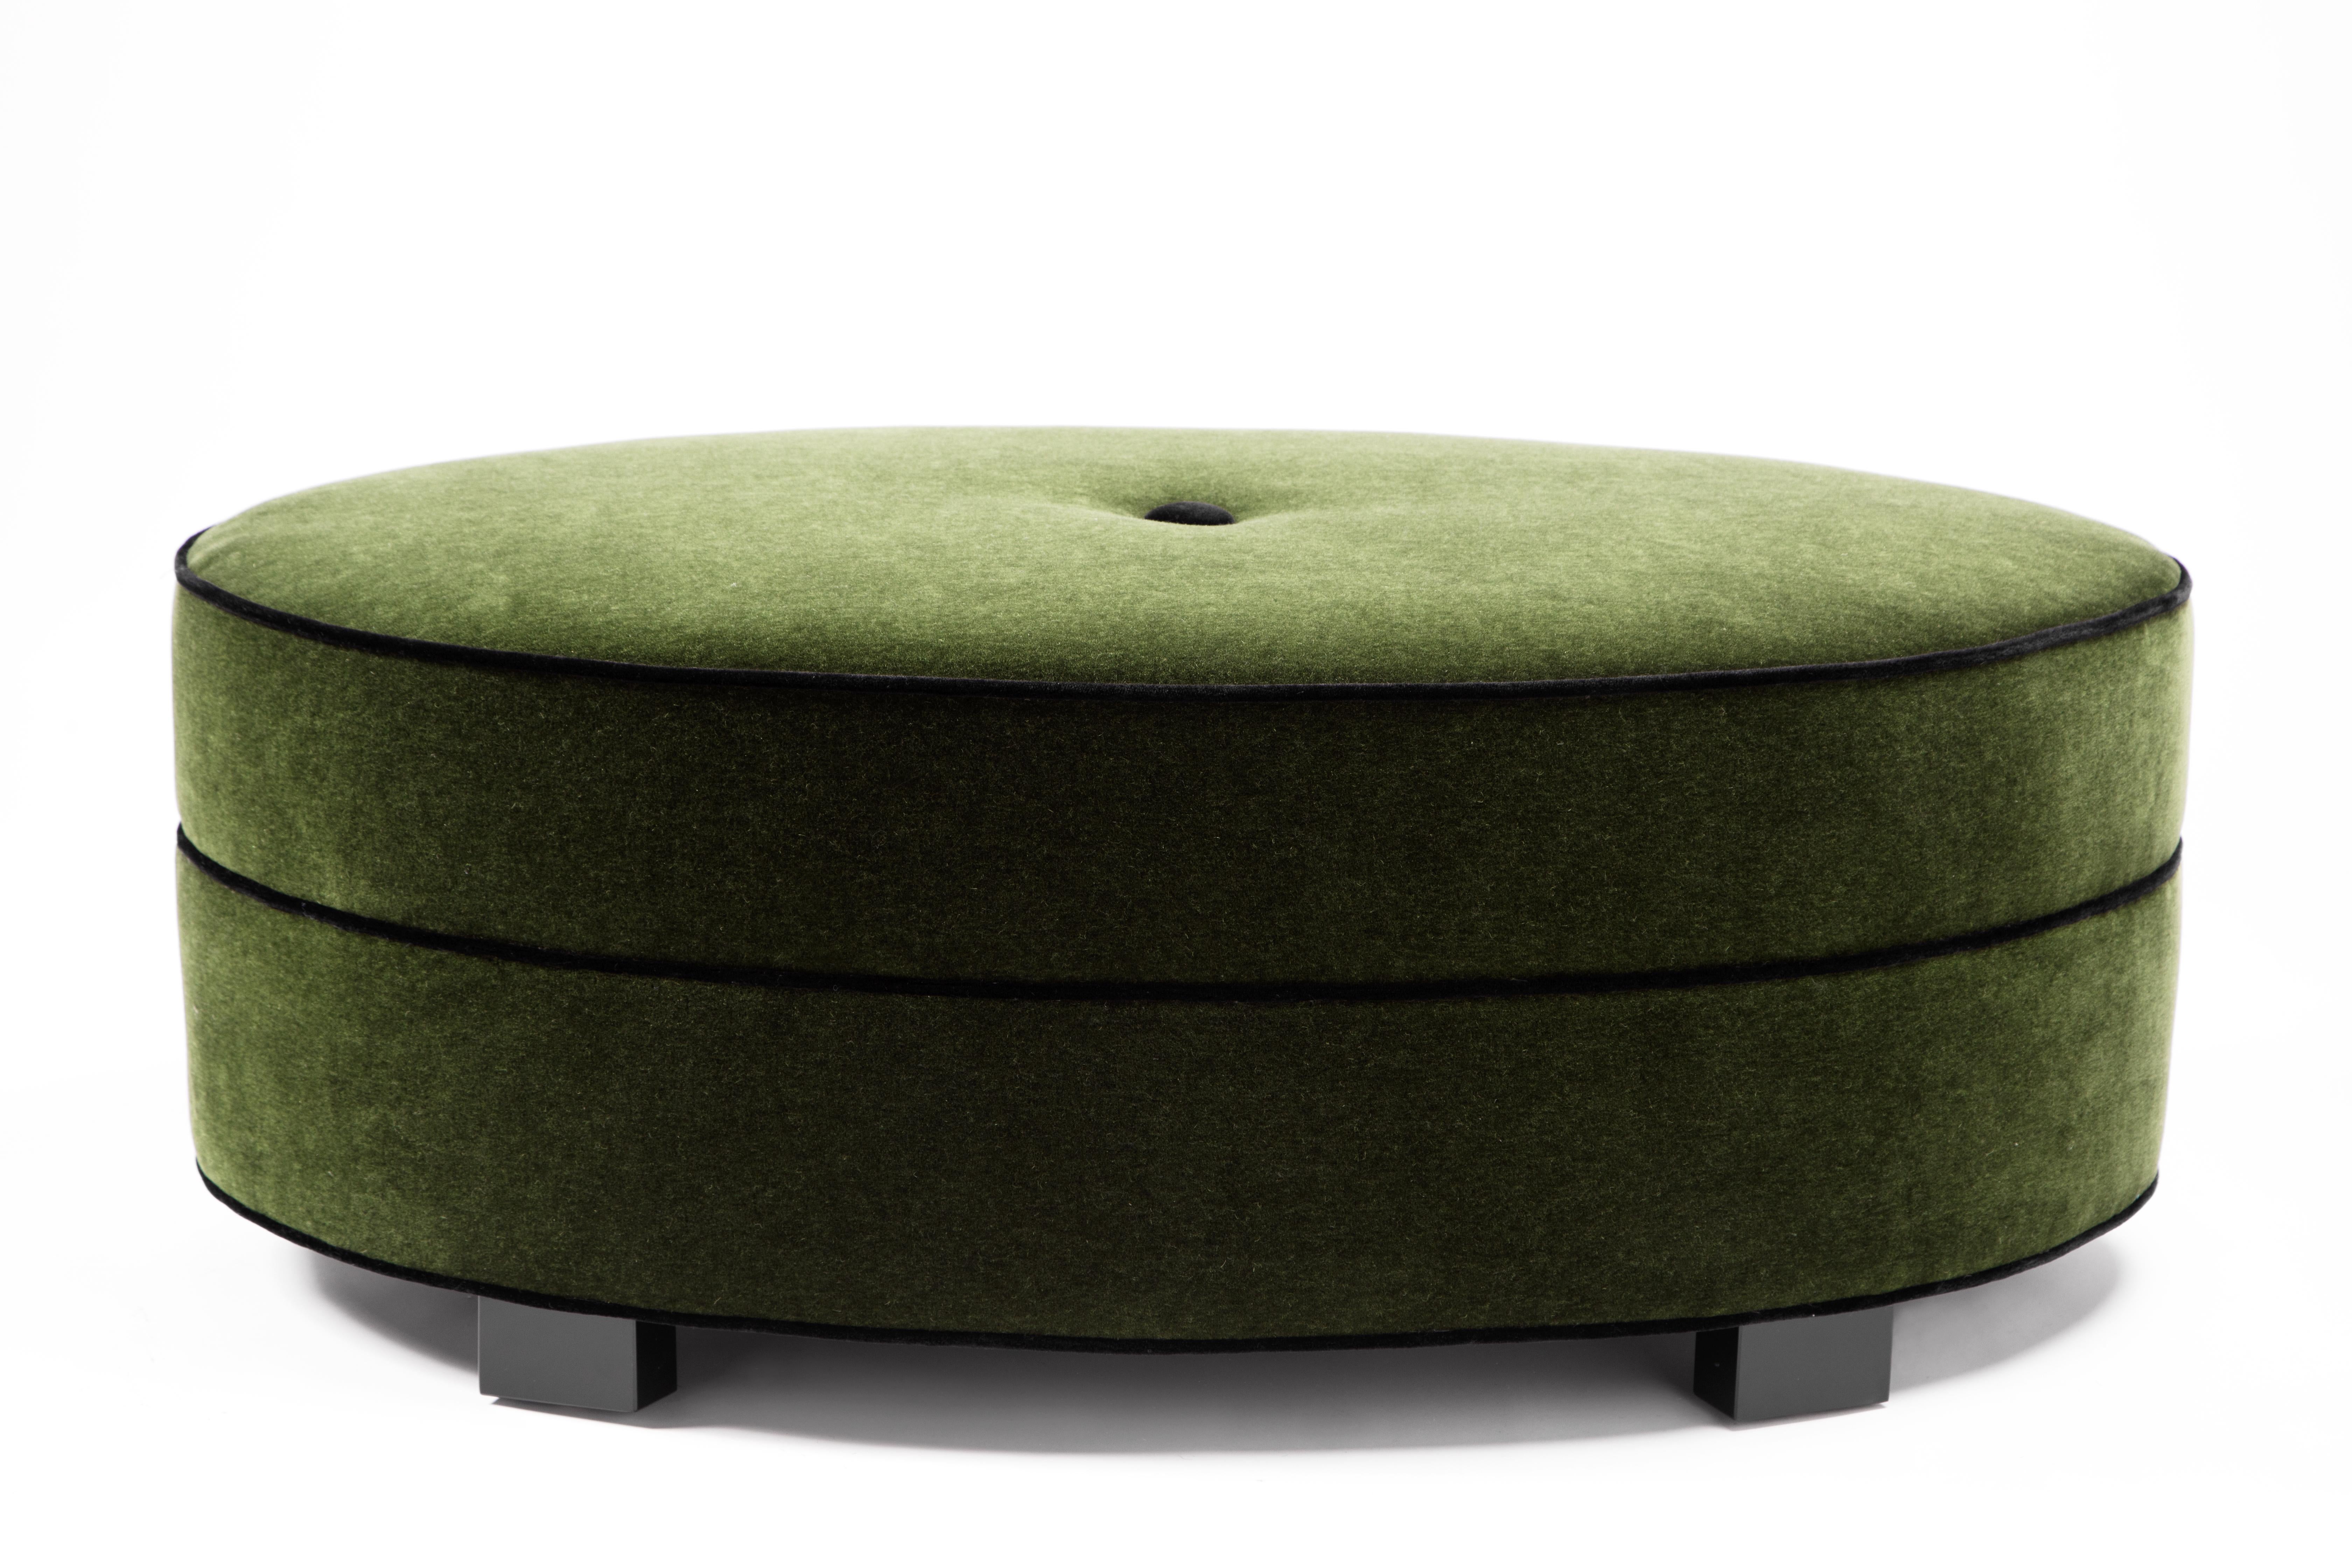 Hand-Crafted Art Deco Alessandra Ottoman Handcrafted by JAMES by Jimmy DeLaurentis For Sale